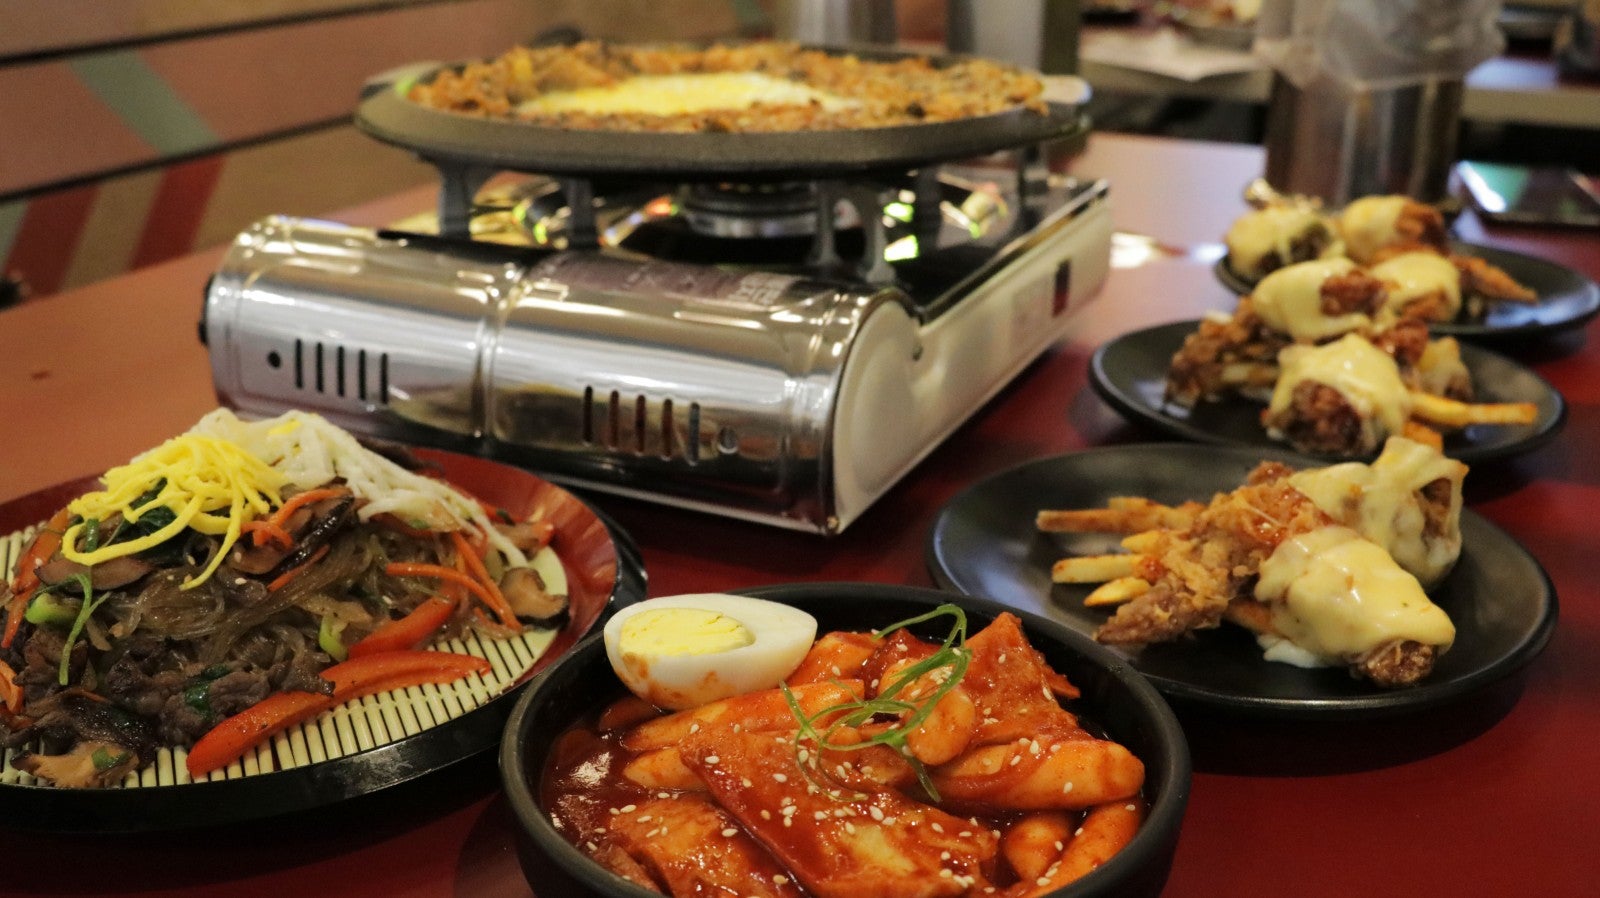 This Restaurant in KL Serves Delicious Korean Food That Is Super Affordable! - WORLD OF BUZZ 3